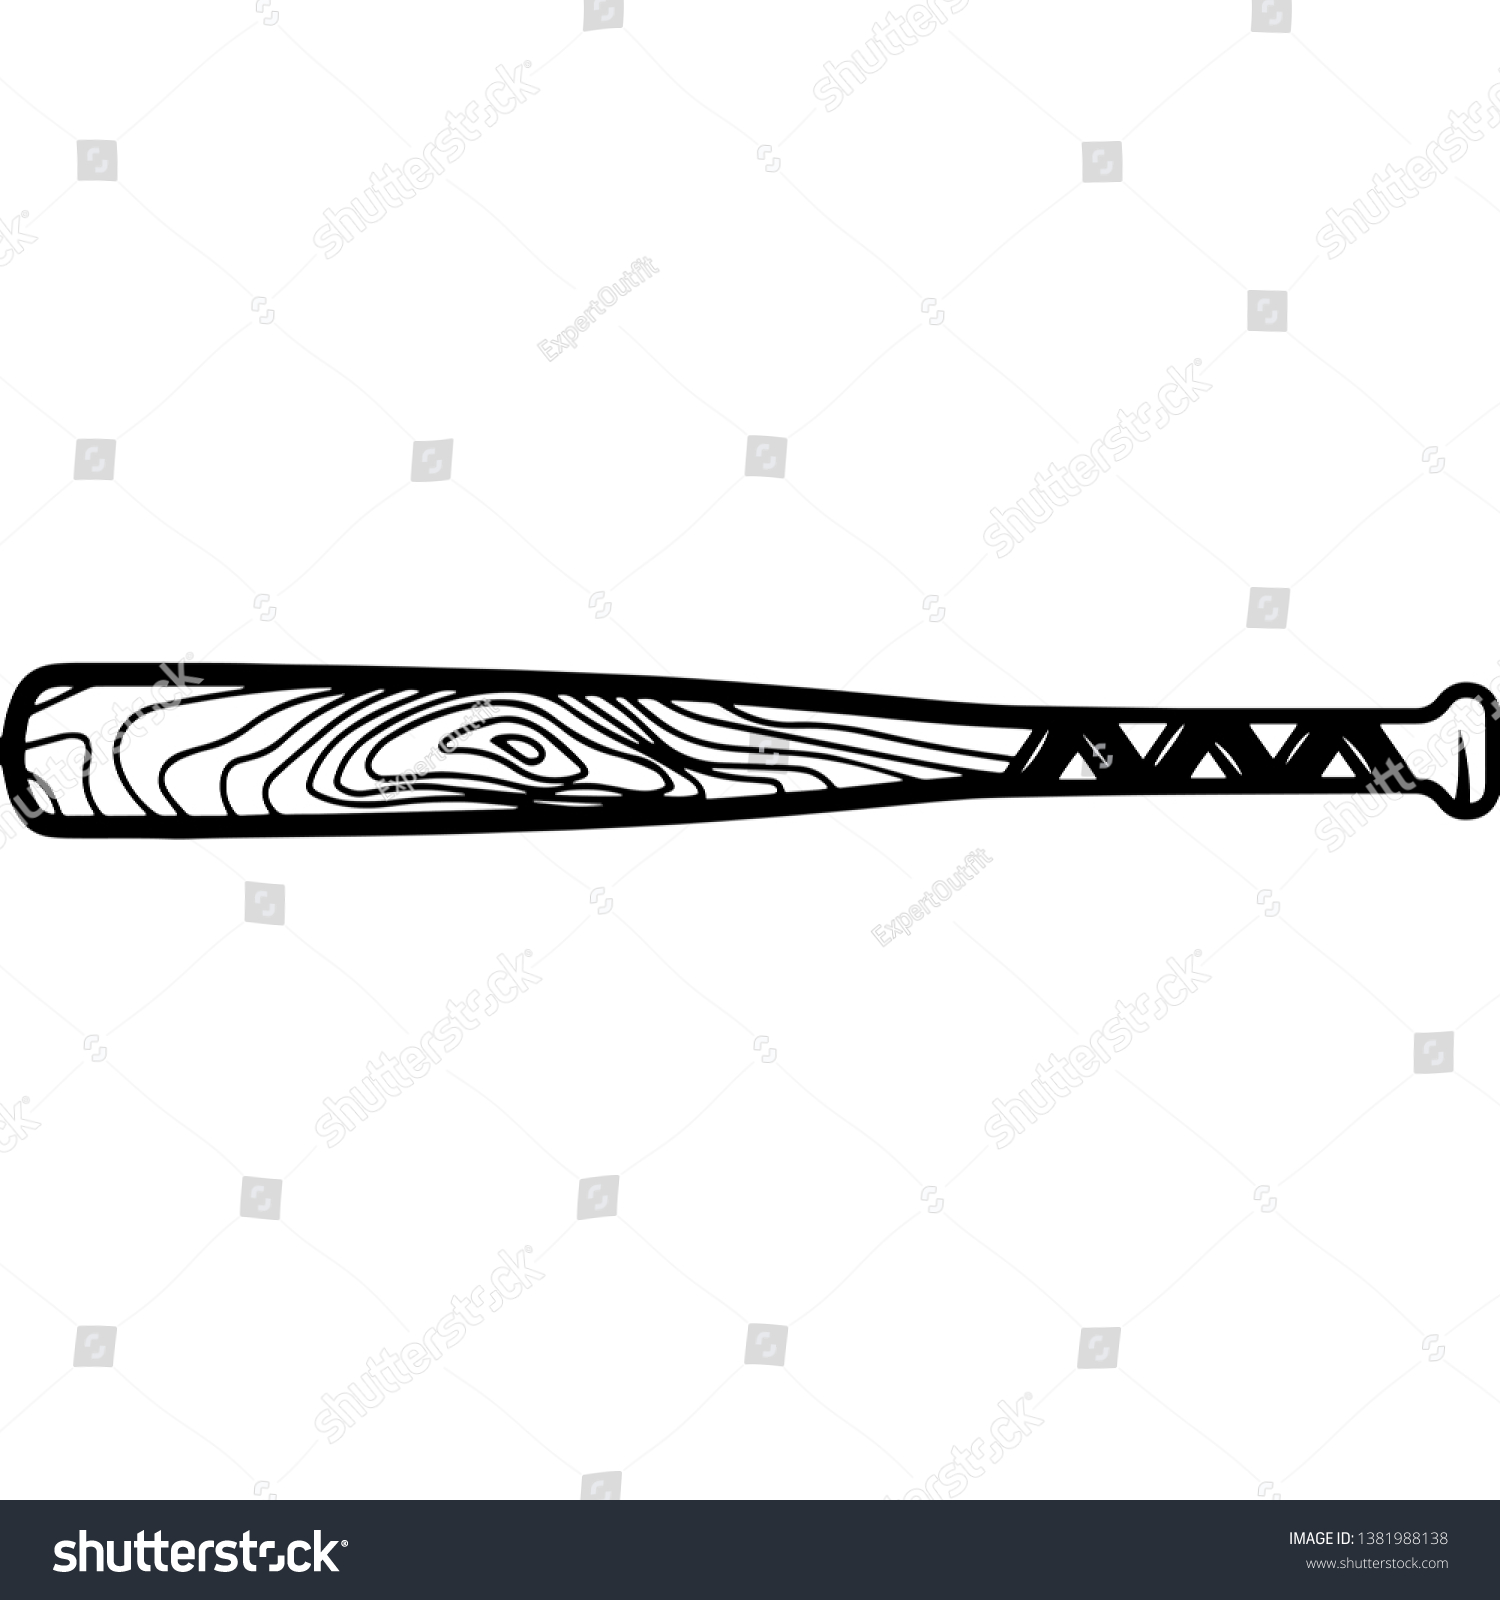 SVG of Baseball Bat With Hand Grips svg